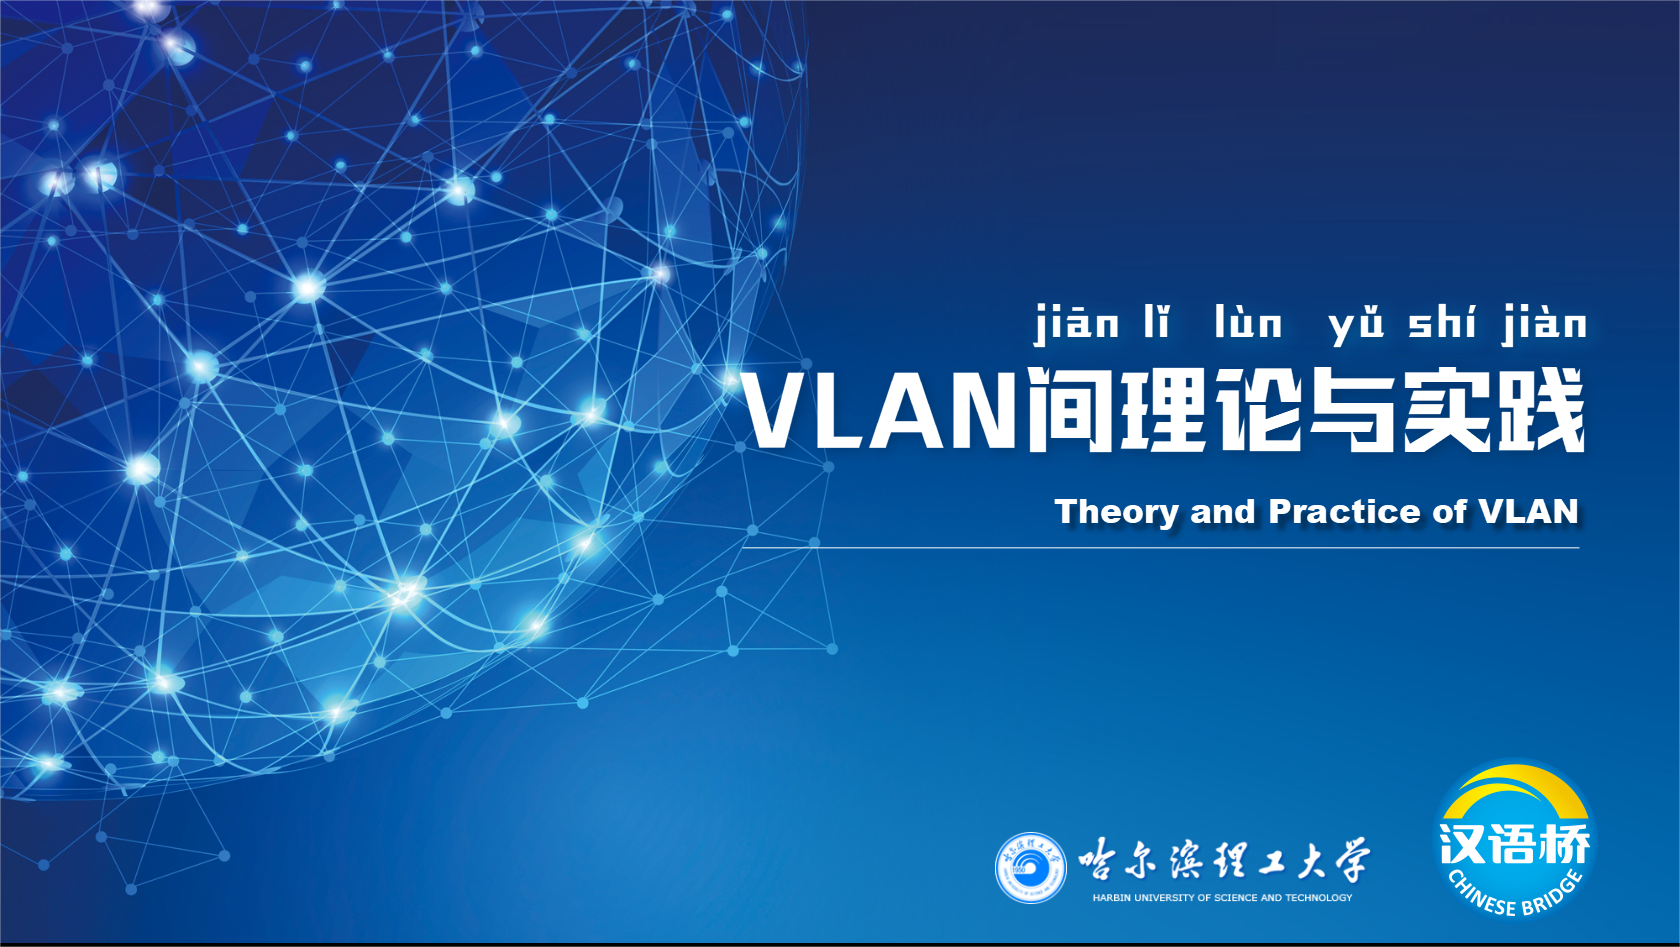 Theory and Practice of VLAN